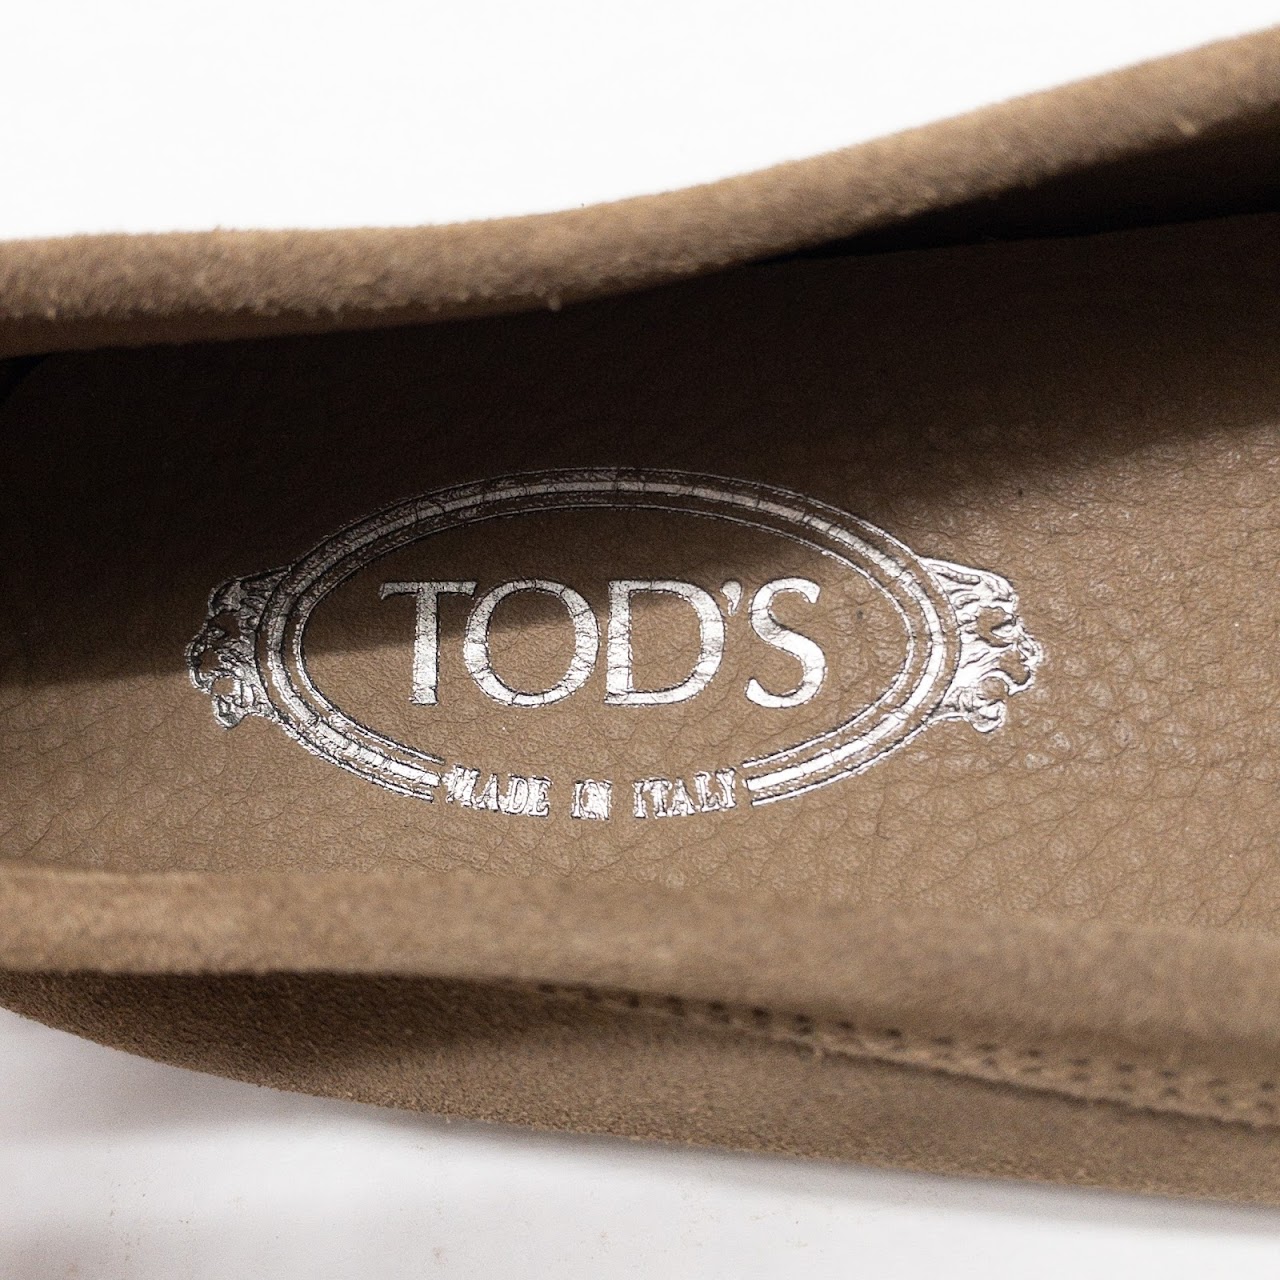 Tod's Suede Driving Loafers